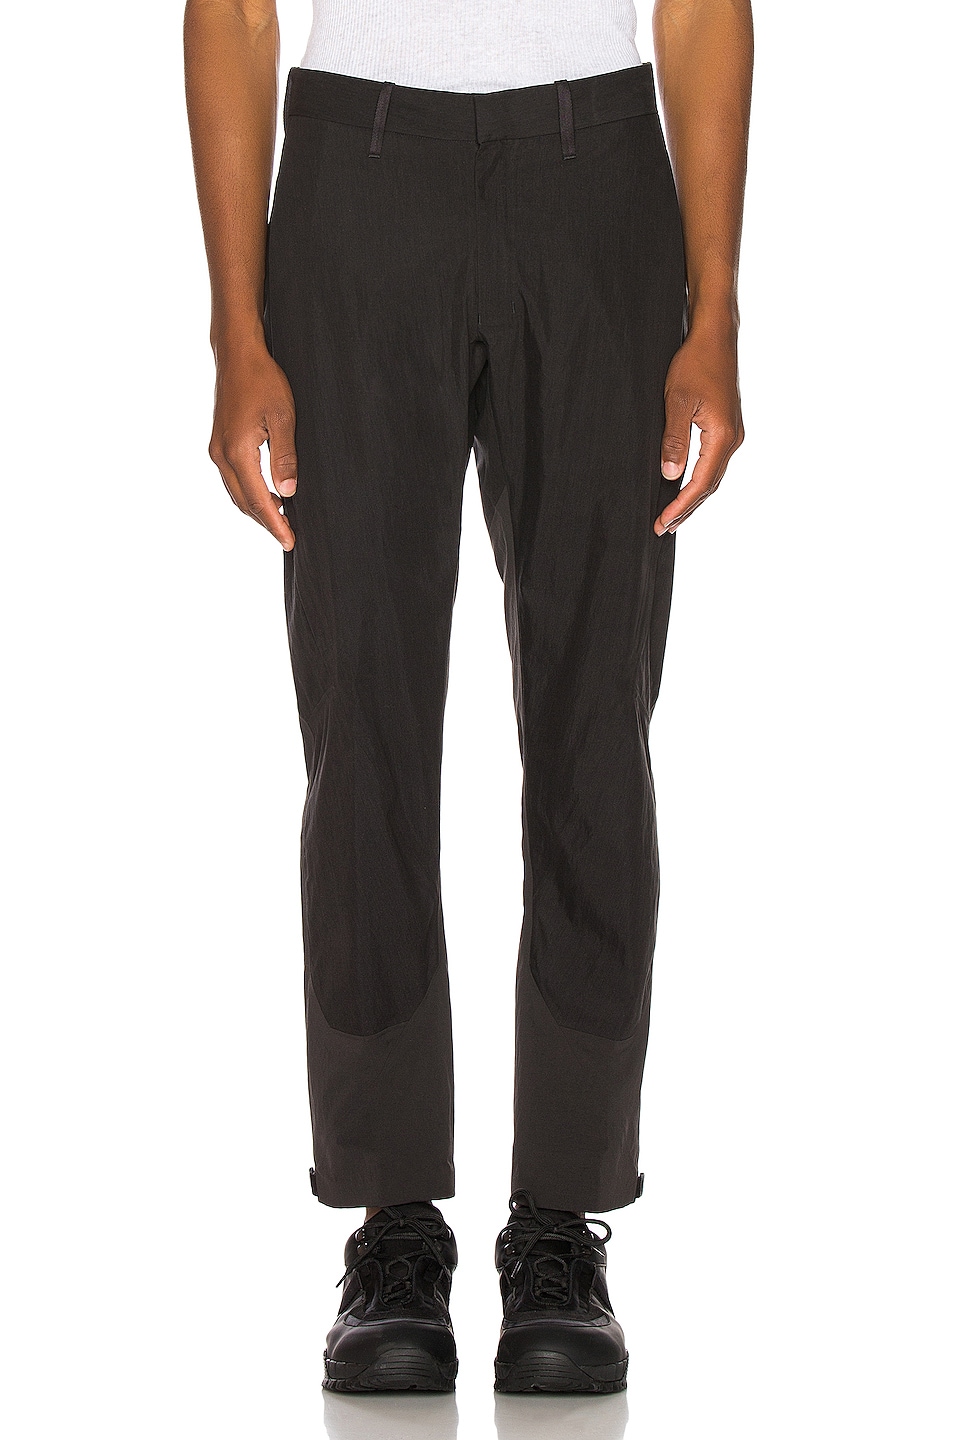 Image 1 of Veilance Apparat Pant in Black